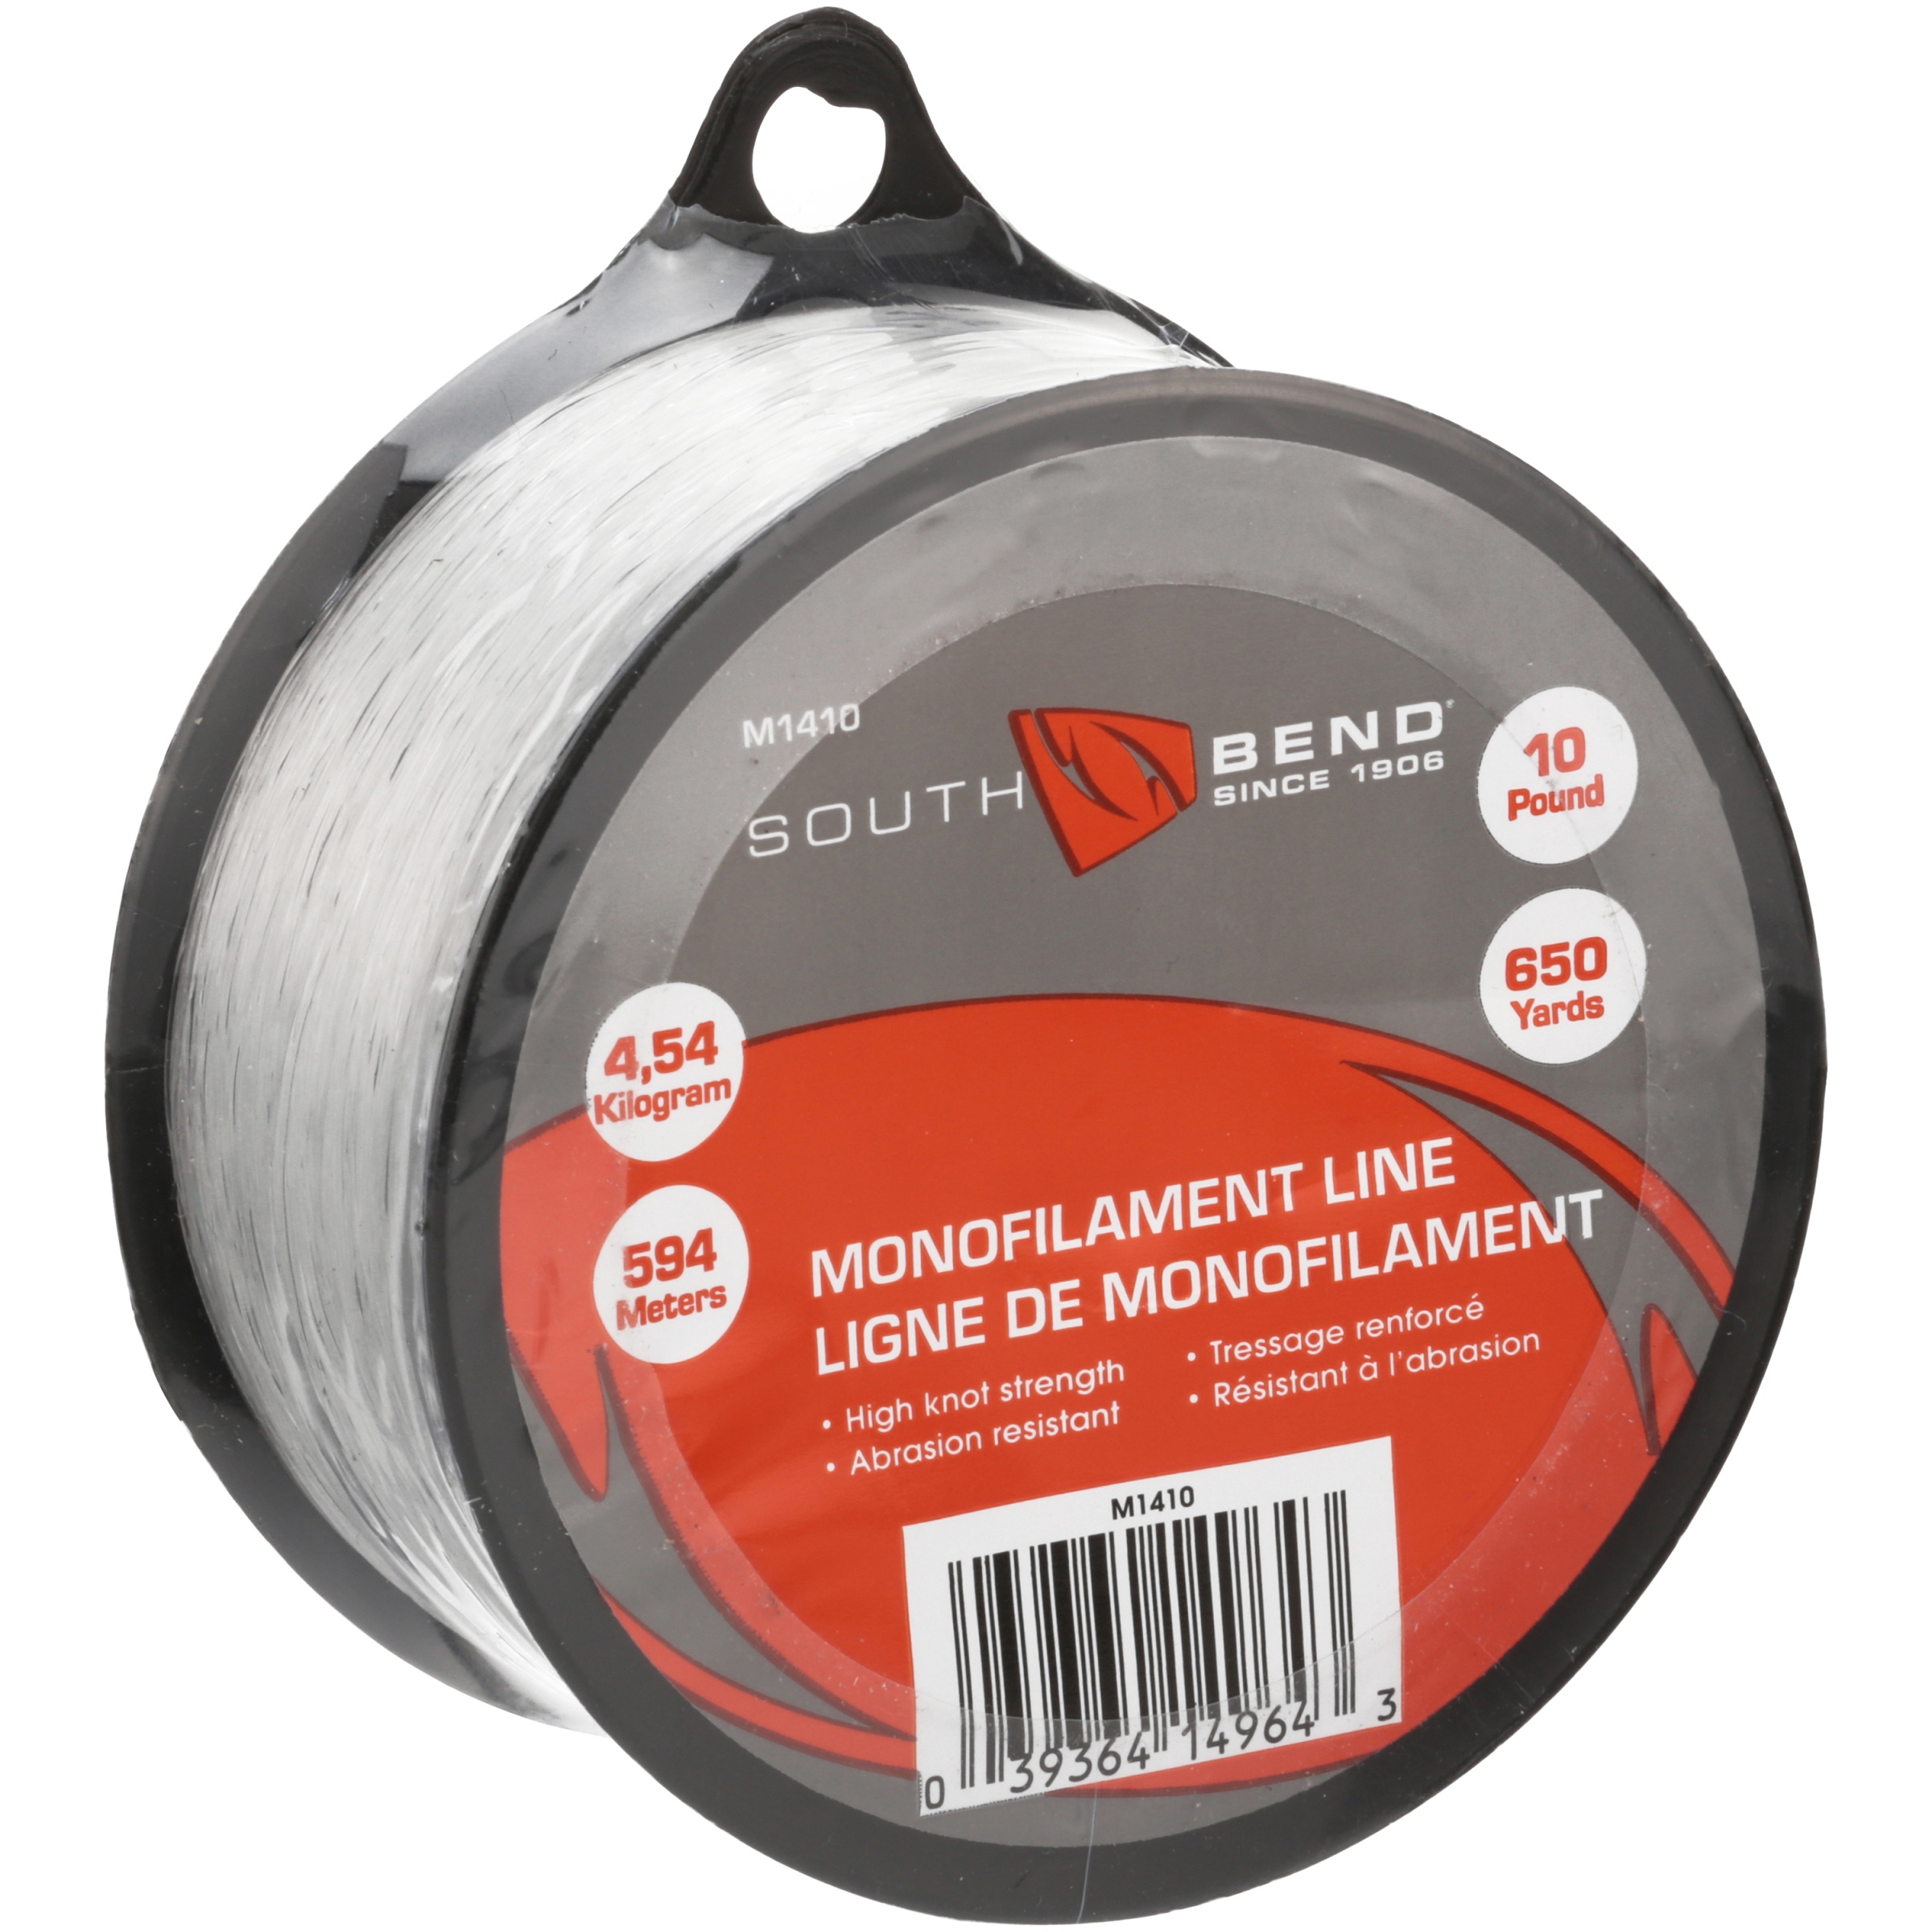 South Bend Monofilament 10-Pound Test Universal Fishing Line, 650 Yds. - image 1 of 5